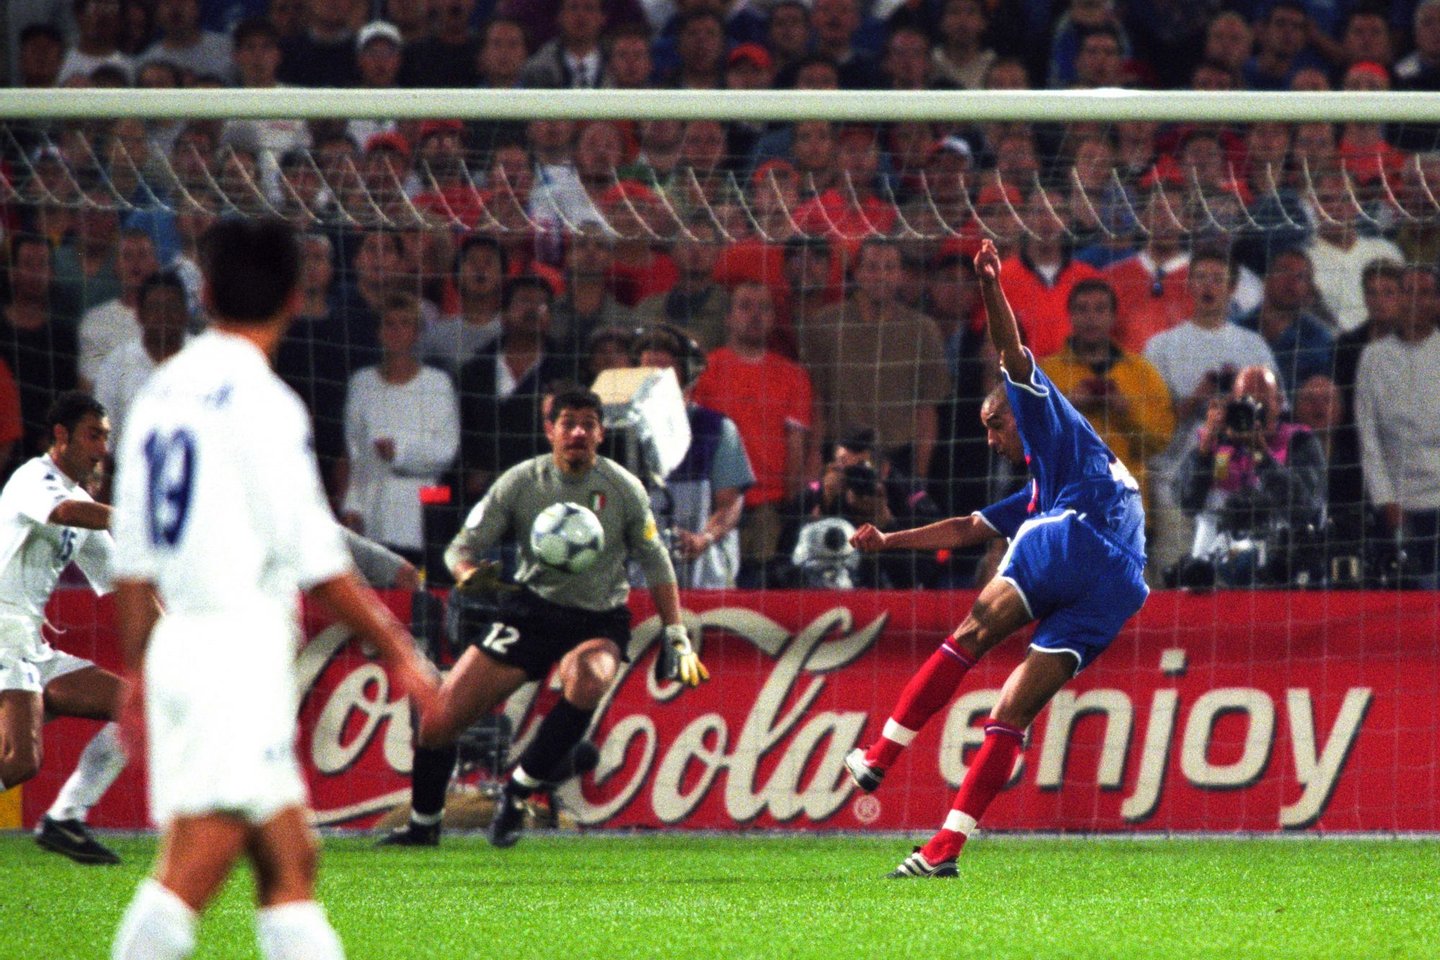 David Trezeguet shoots into the top corner and scores the 'Golden Goal' to win the game and the title and Francesco Toldo Goalkeeper of Italy during the final of the Football European Championships (Euro 2000) between France and Italy in Rotterdam, Netherlands on July 02, 2000 ( Photo by Eric Renard / Onze / Icon Sport via Getty Images )